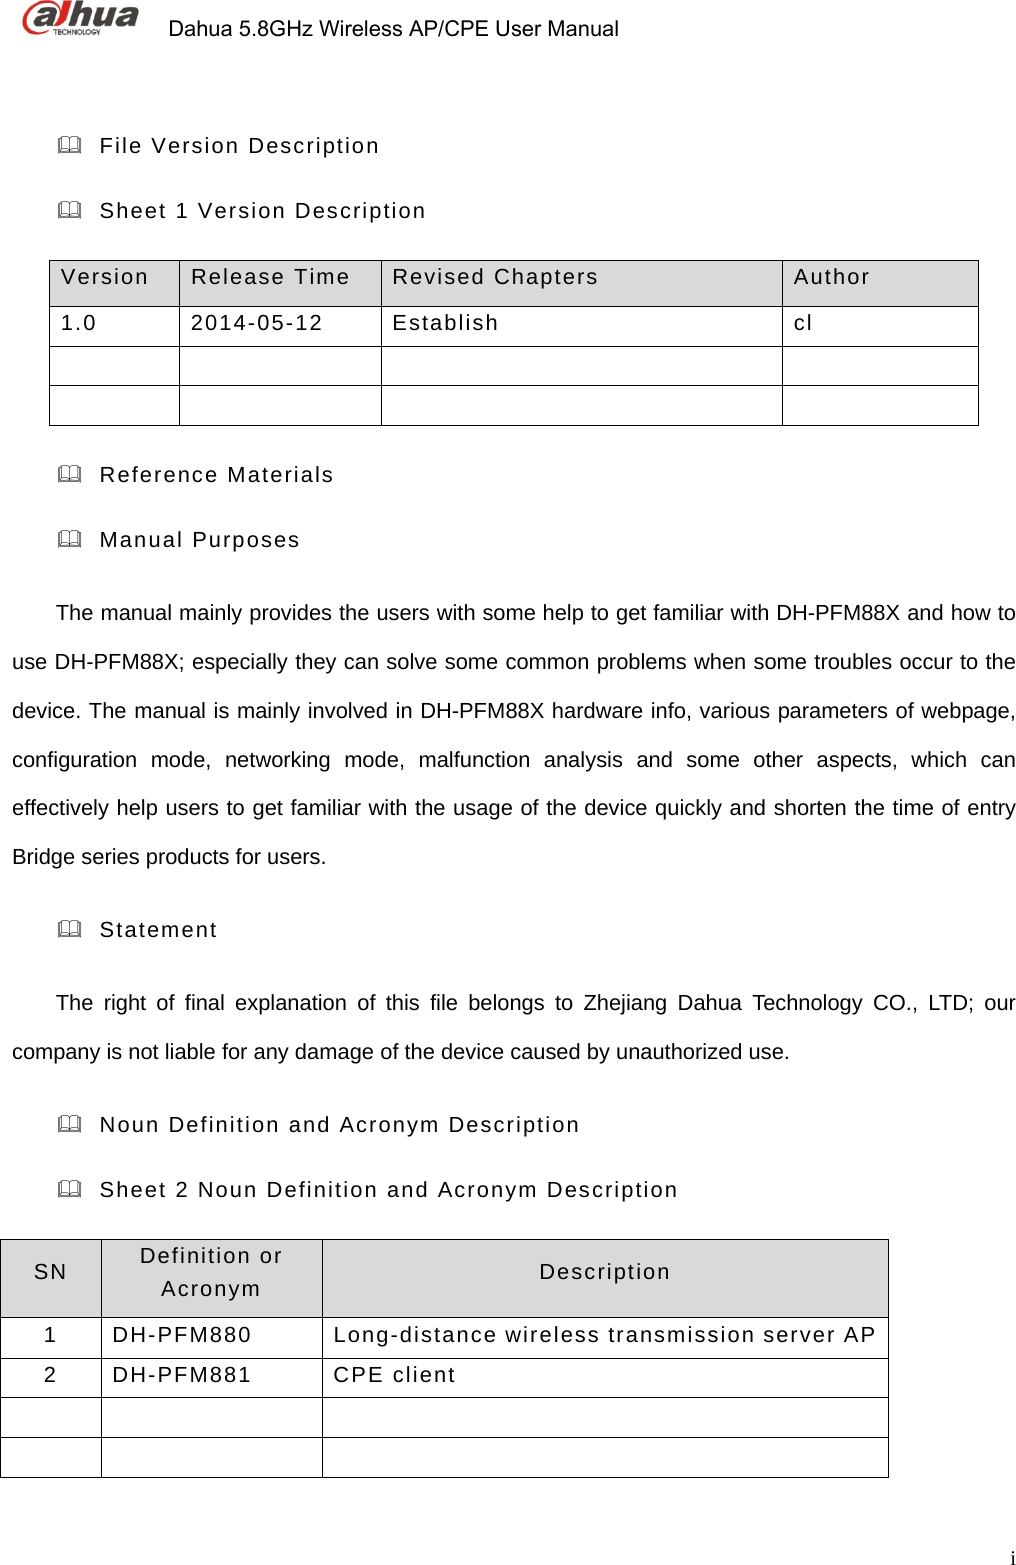             Dahua 5.8GHz Wireless AP/CPE User Manual          i  File Version Description   Sheet 1 Version Description   Version  Release Time  Revised Chapters  Author  1.0 2014-05-12 Establish  cl              Reference Materials  Manual Purposes The manual mainly provides the users with some help to get familiar with DH-PFM88X and how to use DH-PFM88X; especially they can solve some common problems when some troubles occur to the device. The manual is mainly involved in DH-PFM88X hardware info, various parameters of webpage, configuration mode, networking mode, malfunction analysis and some other aspects, which can effectively help users to get familiar with the usage of the device quickly and shorten the time of entry Bridge series products for users.  Statement  The right of final explanation of this file belongs to Zhejiang Dahua Technology CO., LTD; our company is not liable for any damage of the device caused by unauthorized use.   Noun Definition and Acronym Description   Sheet 2 Noun Definition and Acronym Description     SN   Definition or Acronym  Description 1 DH-PFM880  Long-distance wireless transmission server AP 2 DH-PFM881  CPE client         